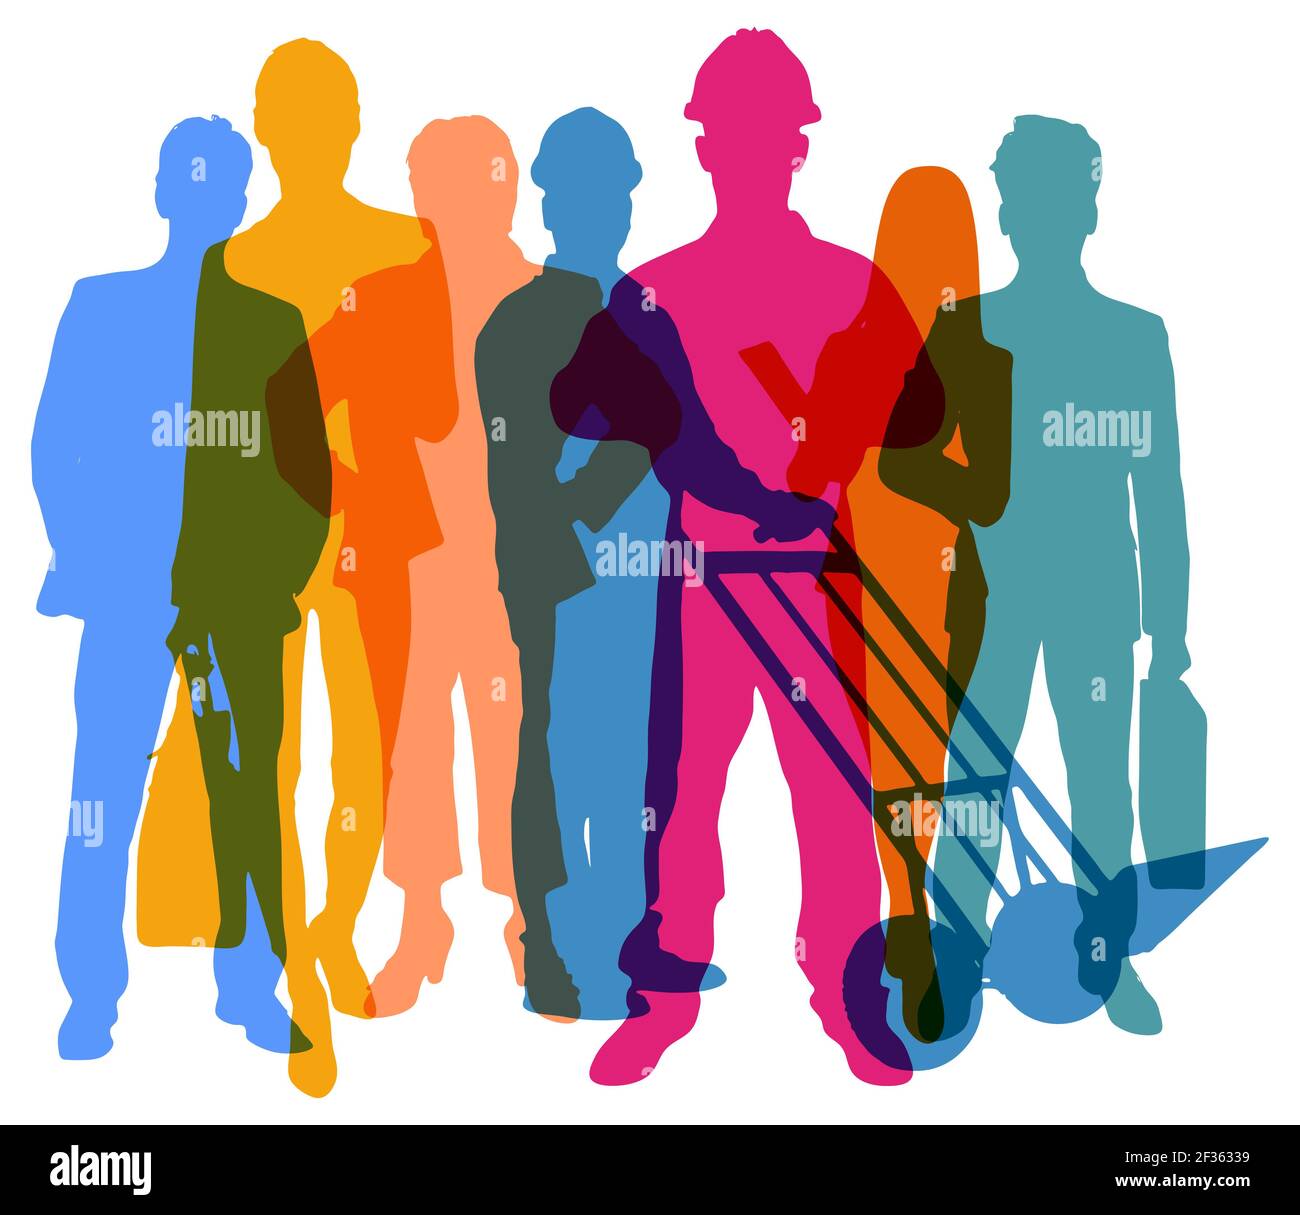 Overlaying silhouettes of people from different professions as a labor market concept Stock Photo